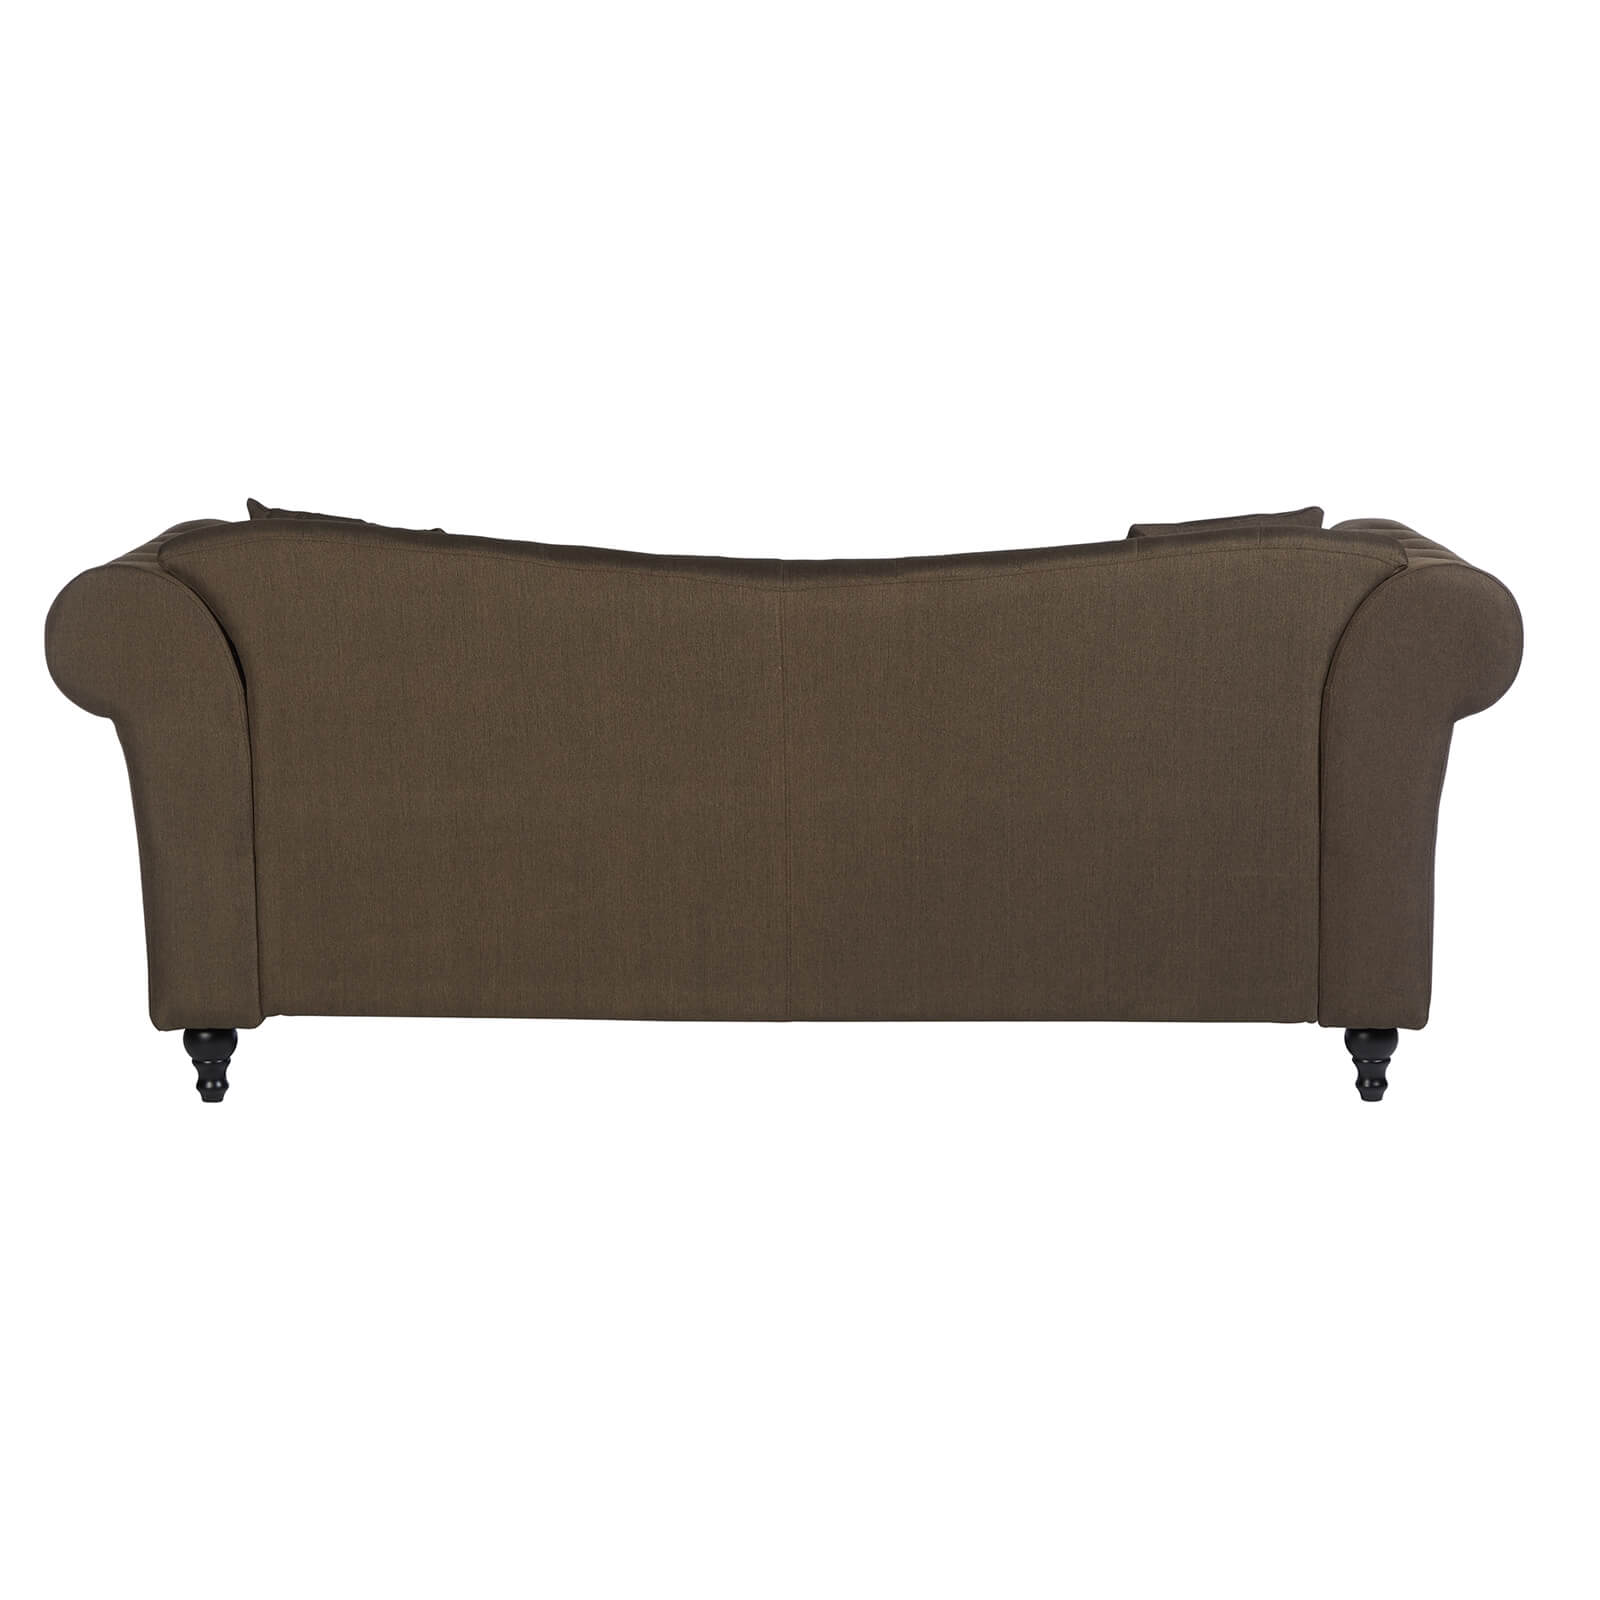 Fable 3 Seat Chesterfield Sofa - Natural